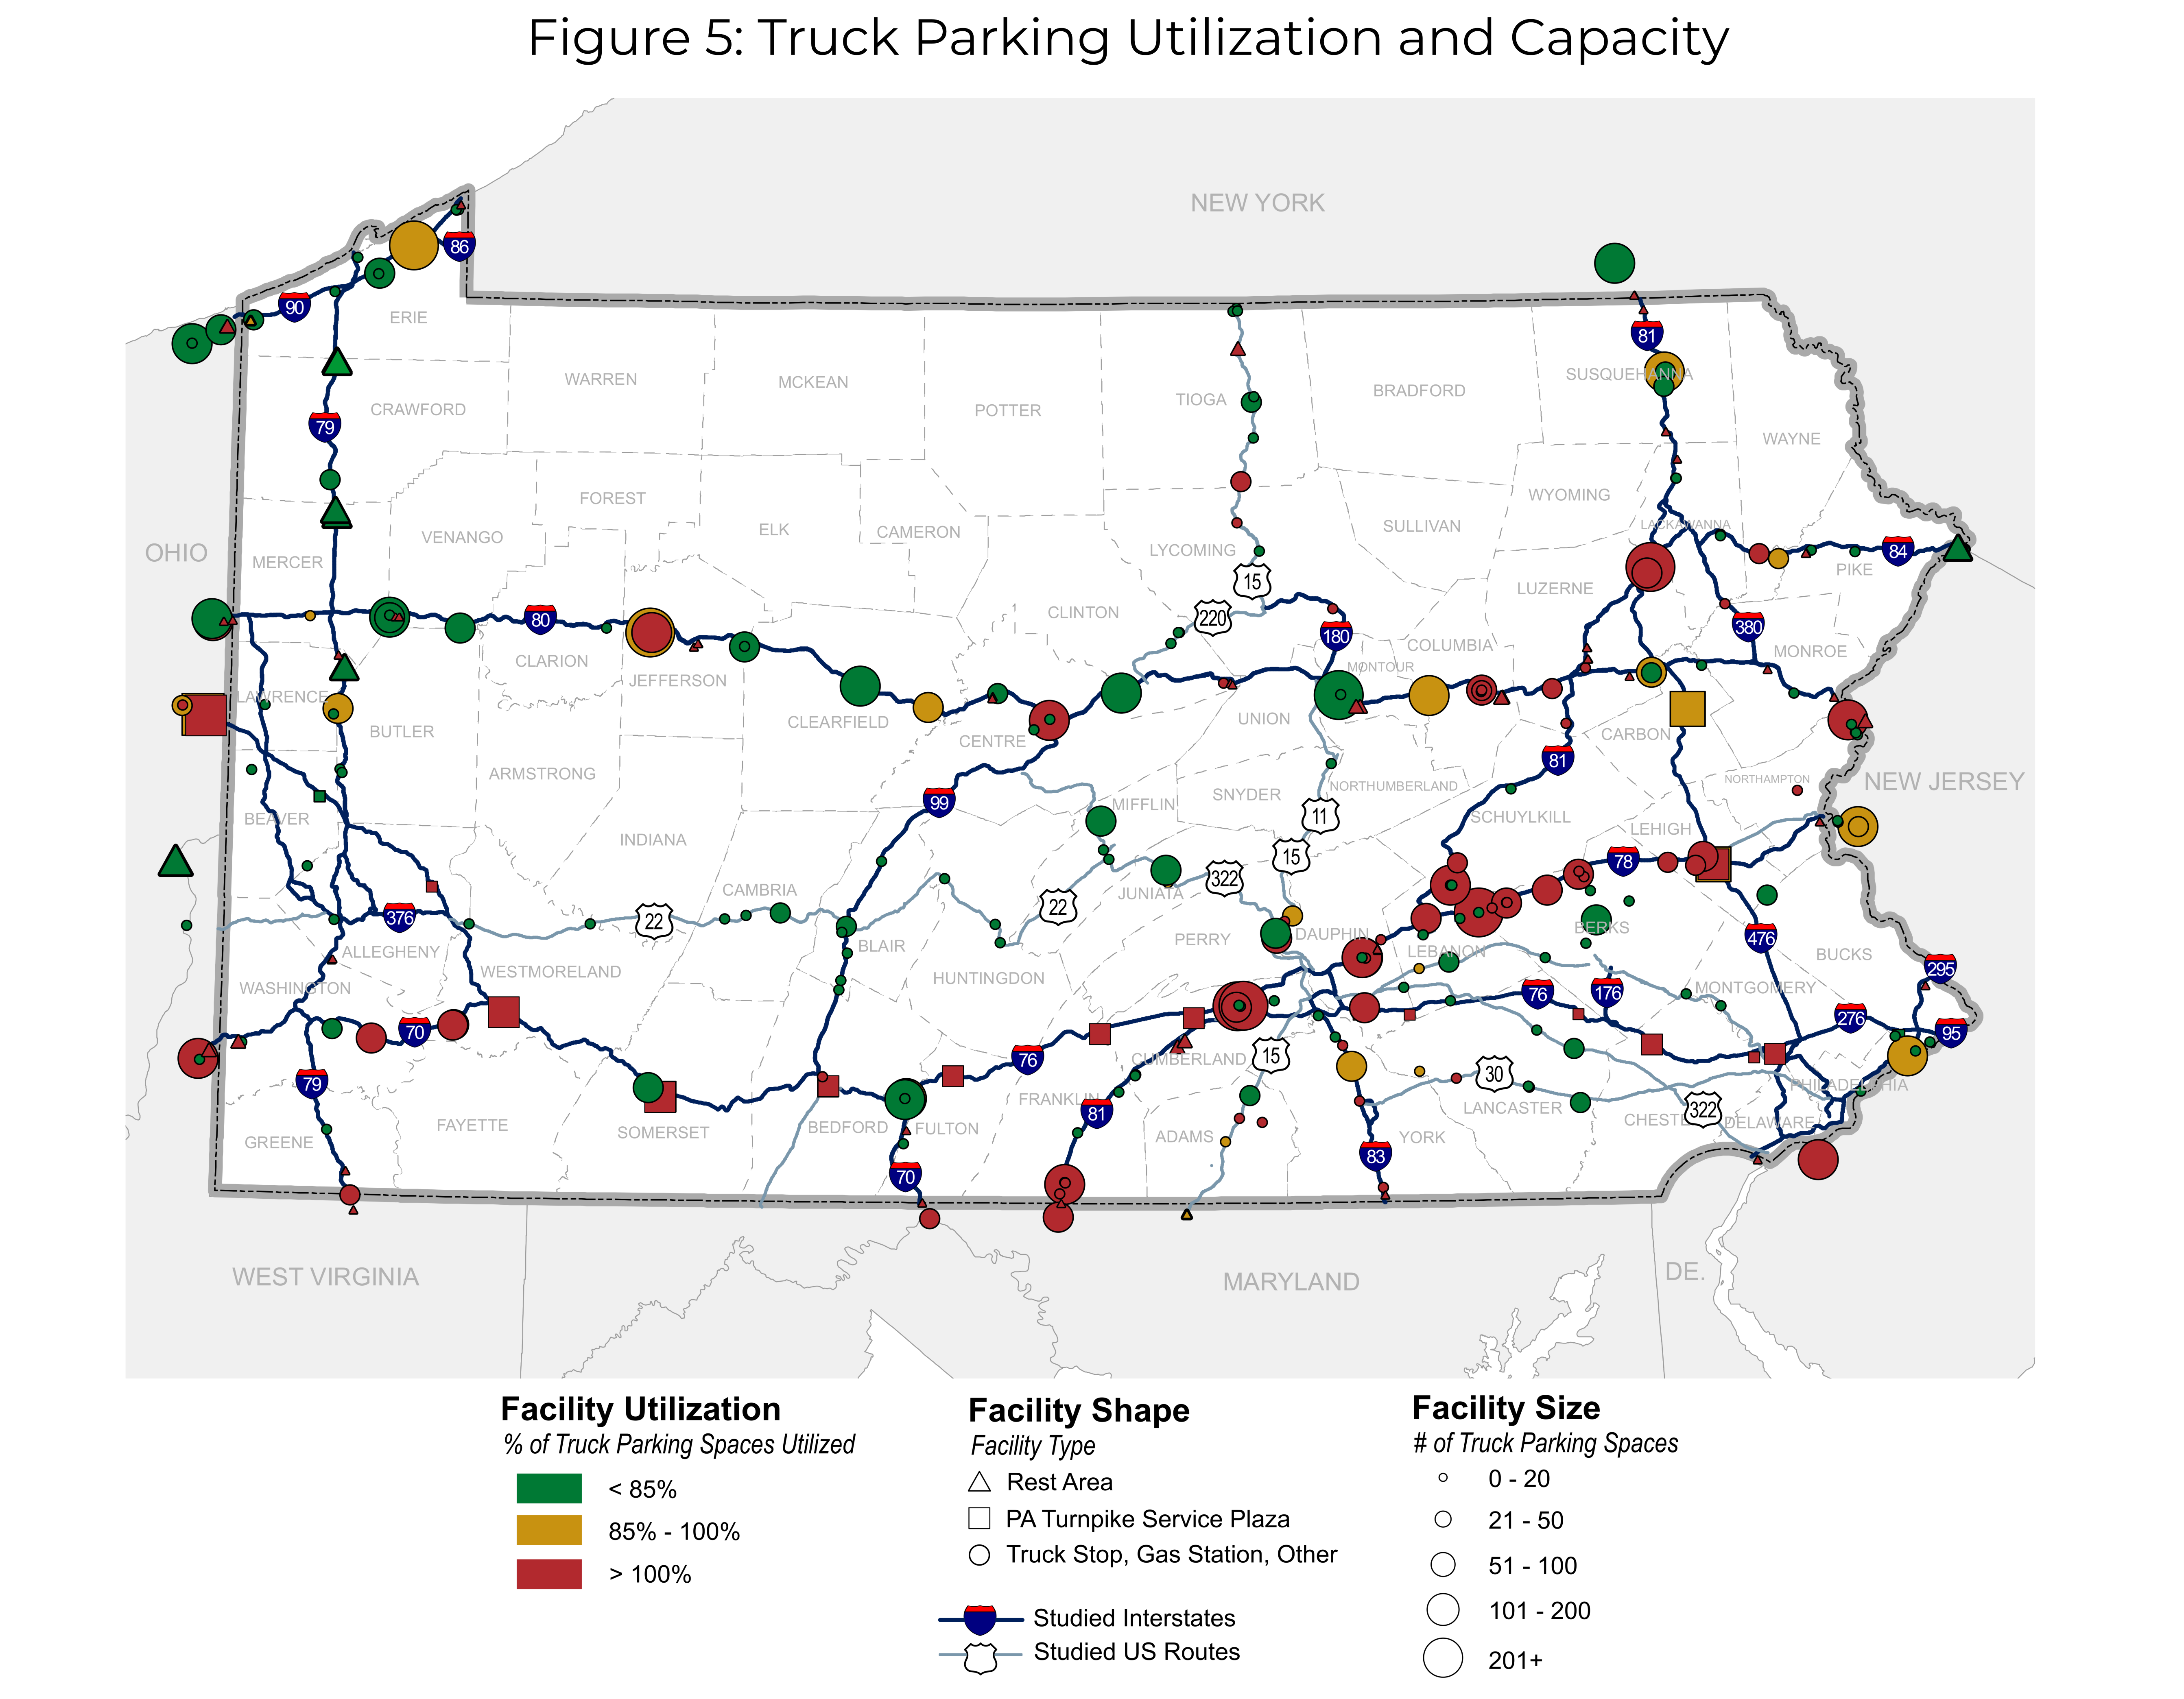 Figure 5 is a state map of Pennsylvania illustrating type, utilization, and size of truck parking facilities along Interstates and US Routes. Facilities are illustrated as circles of graduating sizes, those with the highest number of truck parking spaces being the largest. Over-utilized facilities are illustrated in red.